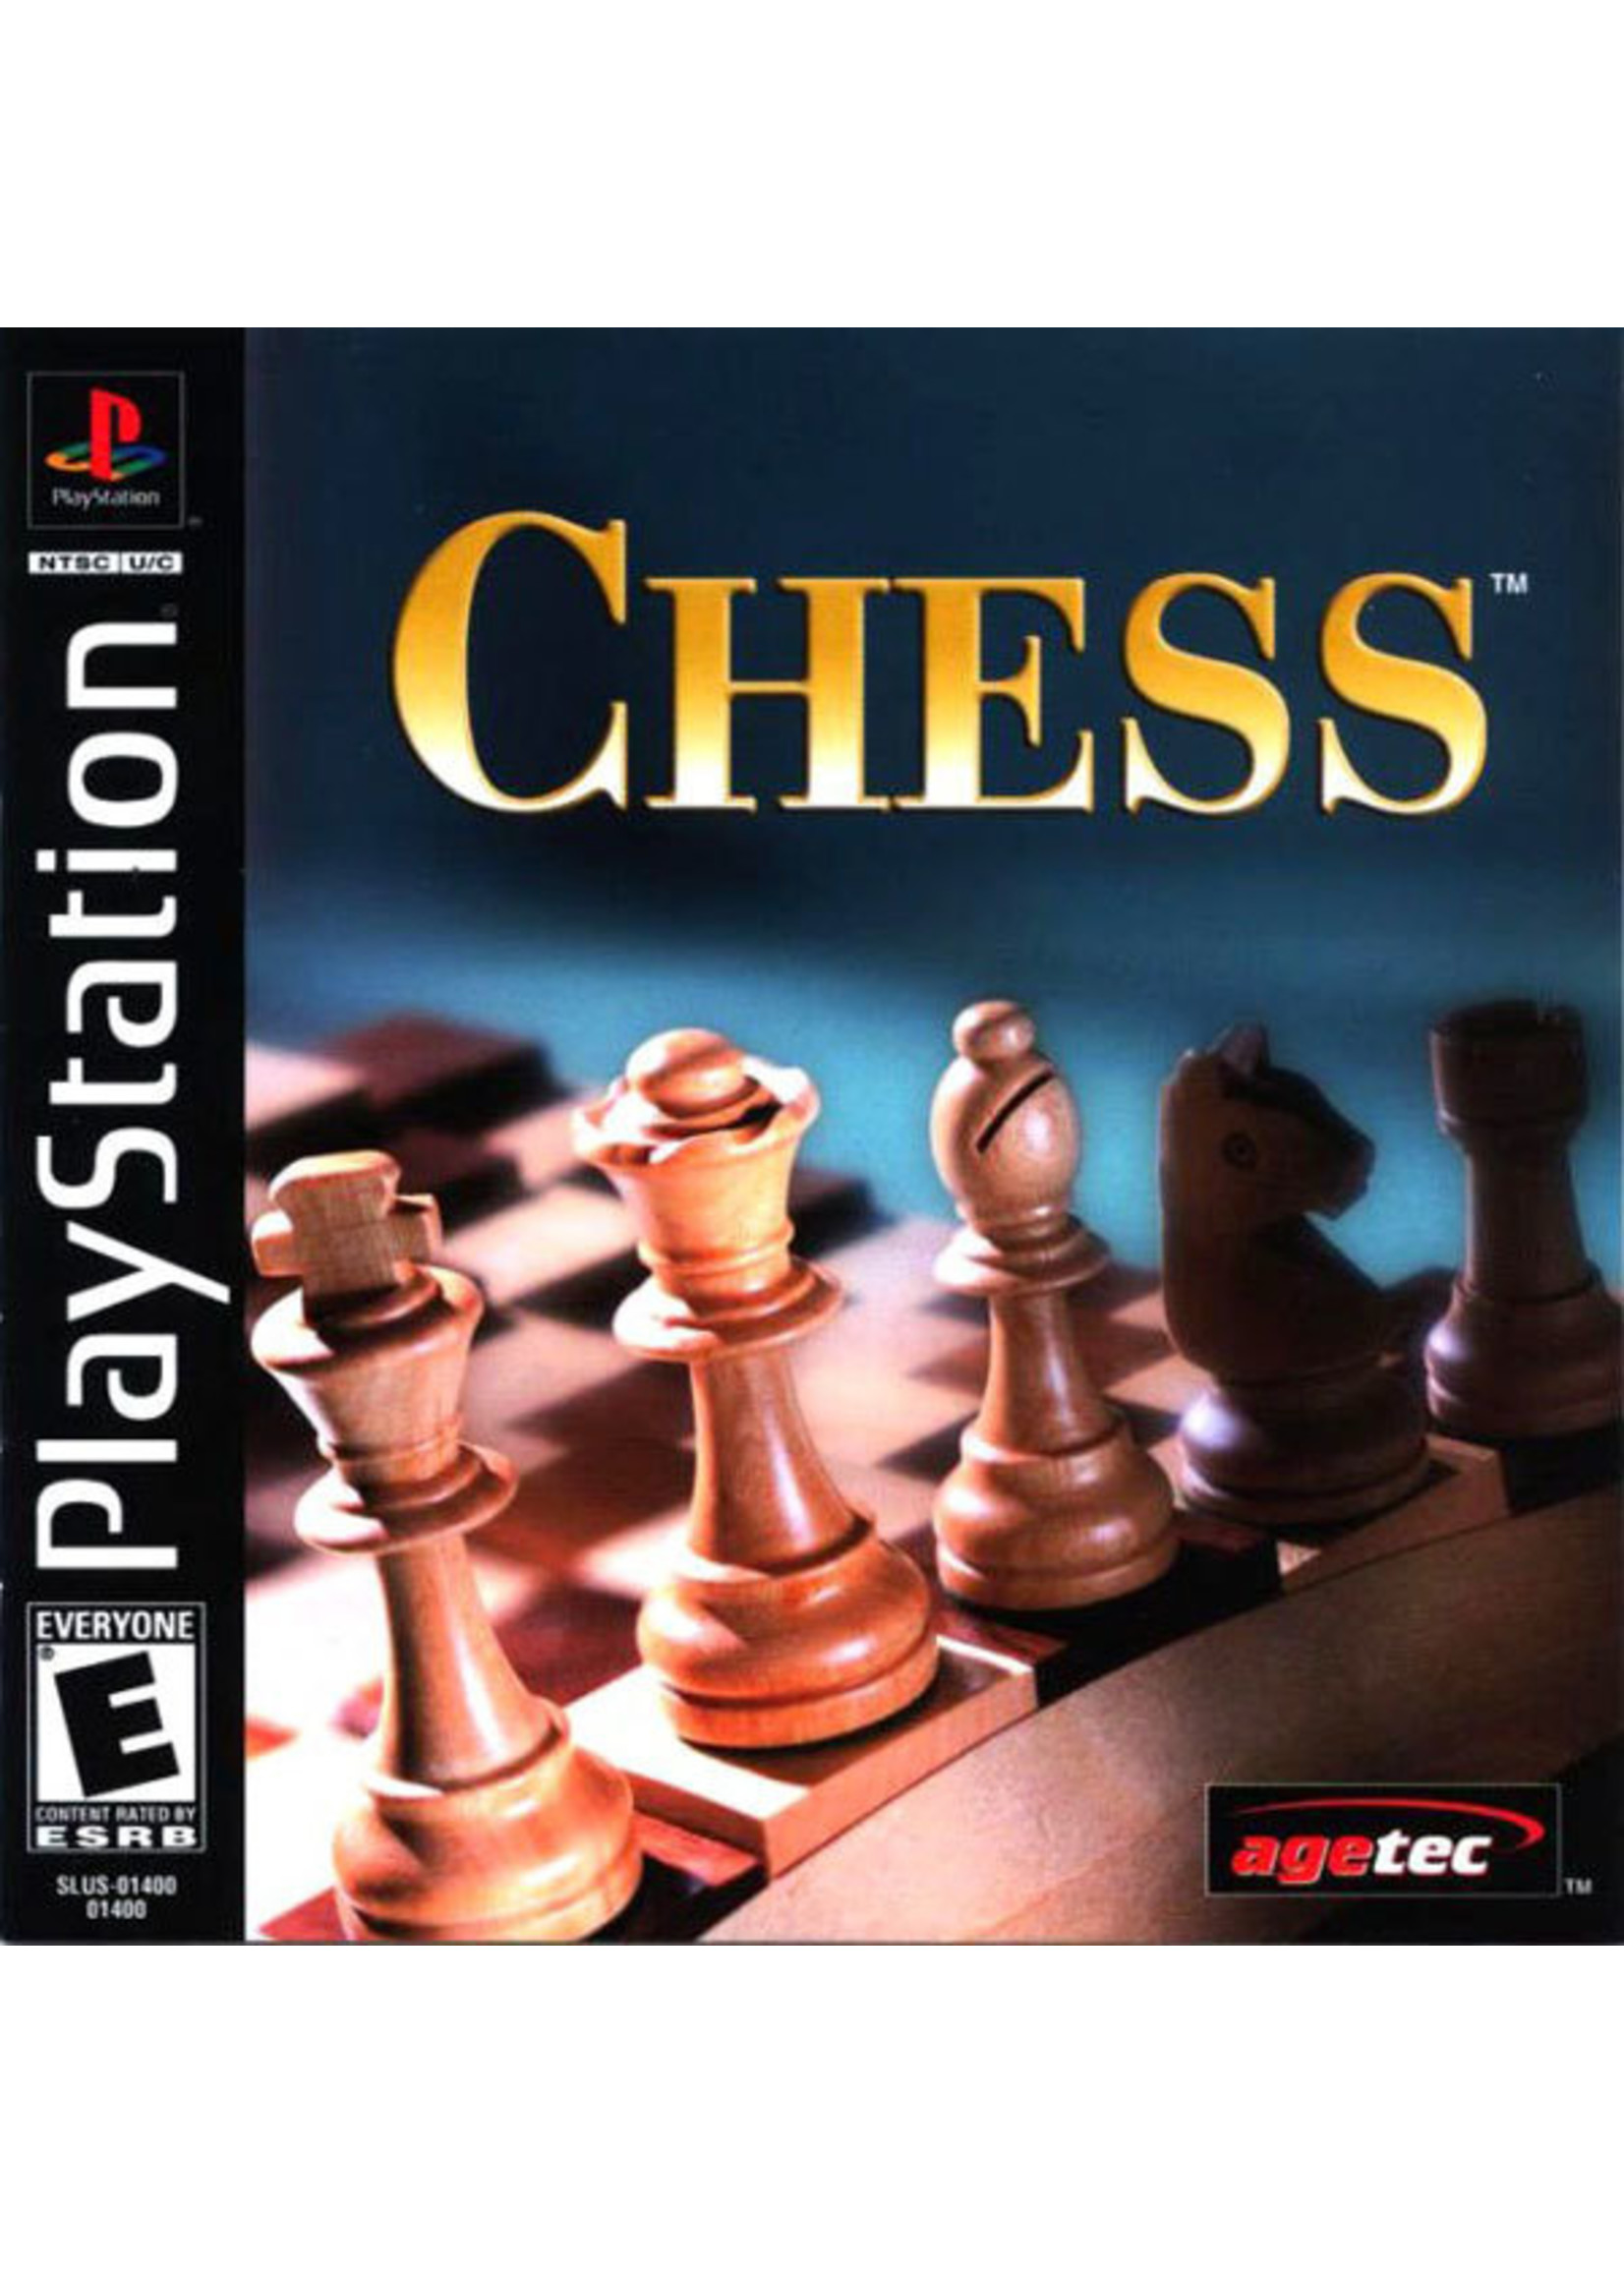 Sony Playstation 1 (PS1) Chess